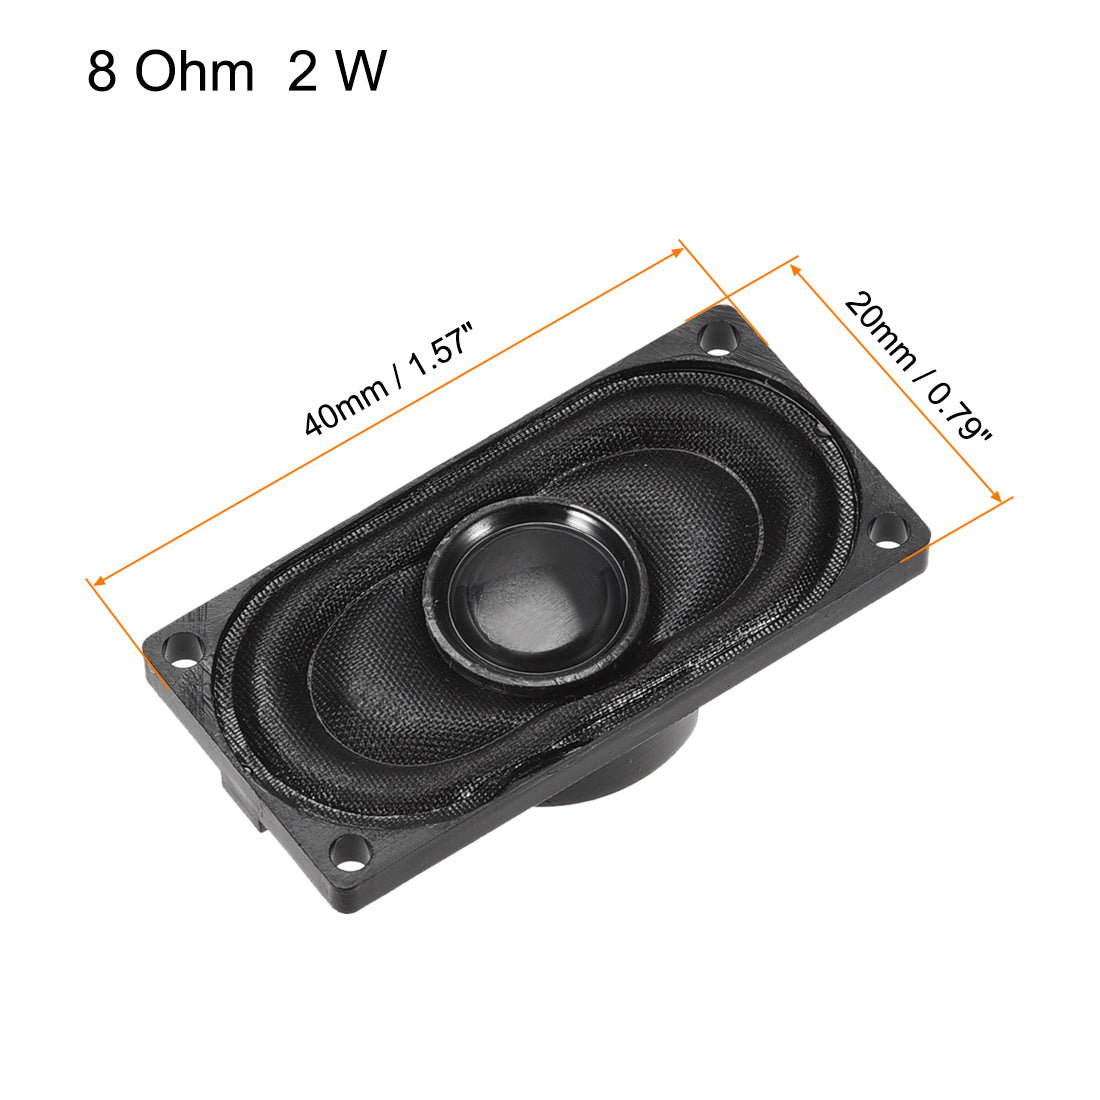 uxcell Uxcell 2W 8 Ohm DIY Magnetic Speaker 20mm x 40mm Square Shape Replacement Loudspeaker for Laptop 4pcs